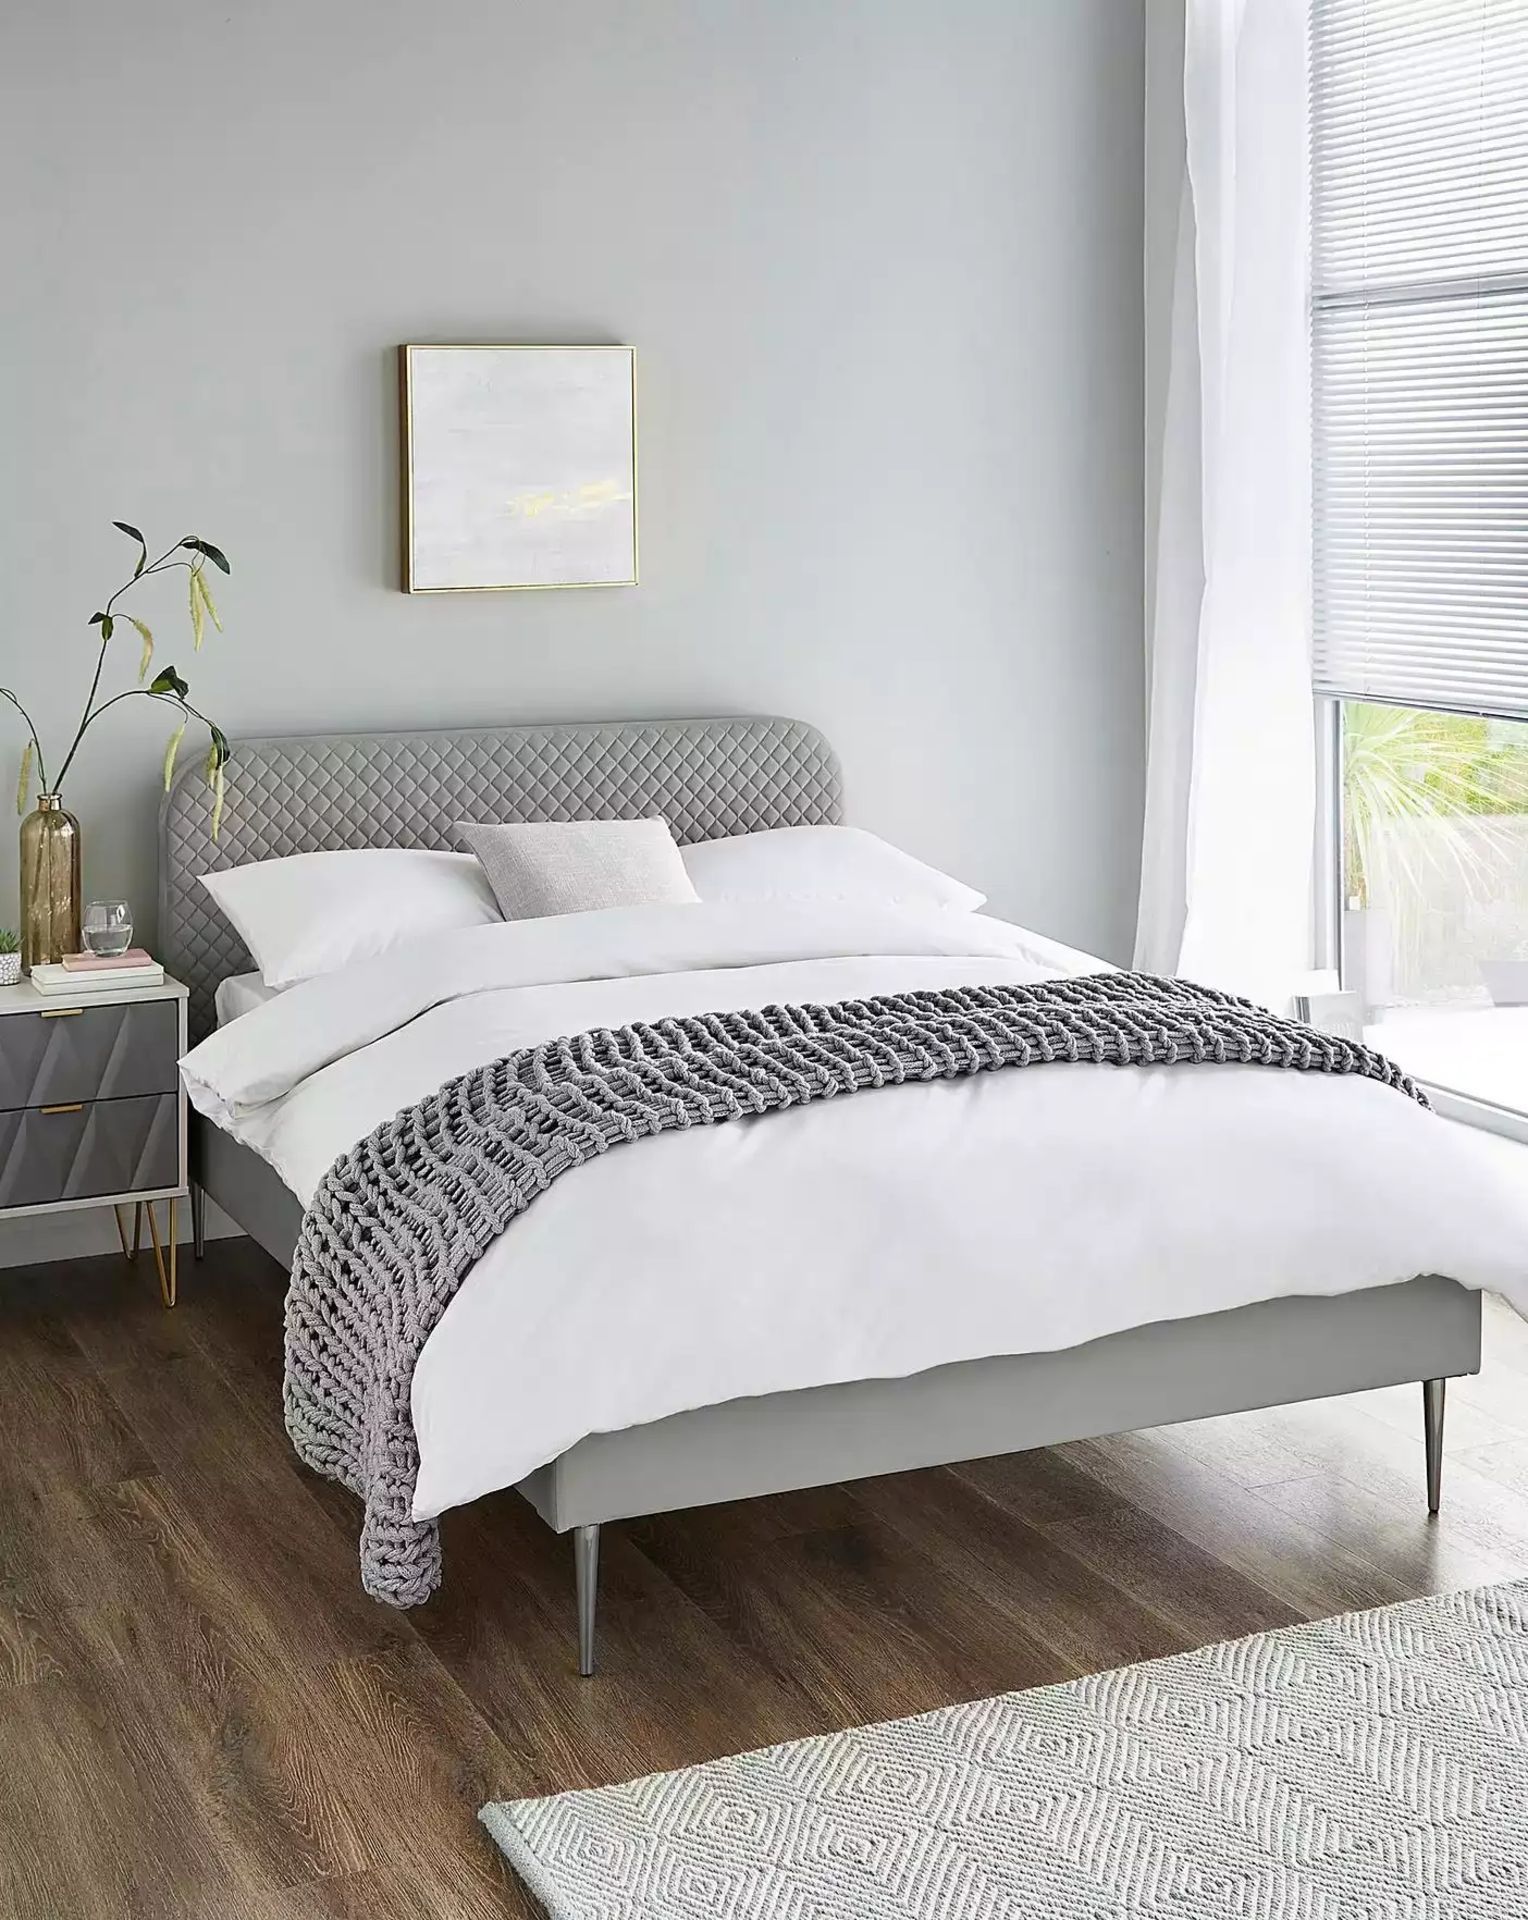 BRAND NEW ARDEN Quilted KINGSIZE Bed Frame. PEWTER. RRP £339 EACH. The Arden Quilted Bed is the